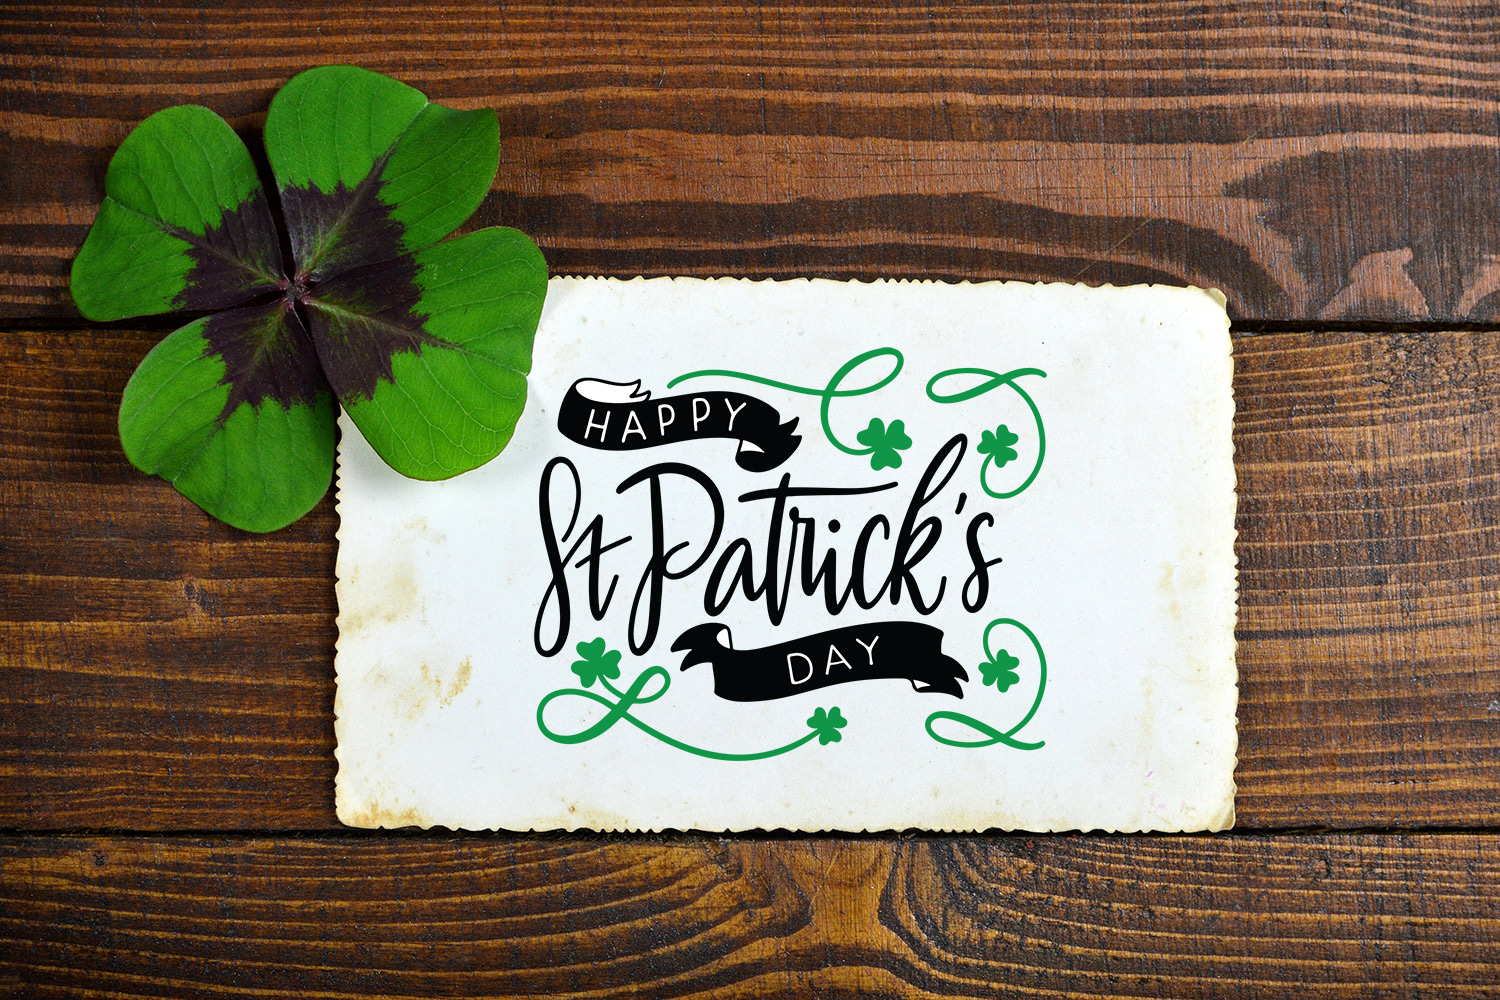 St Patrick's Day Background Svg Graphic by Graphicyes · Creative Fabrica